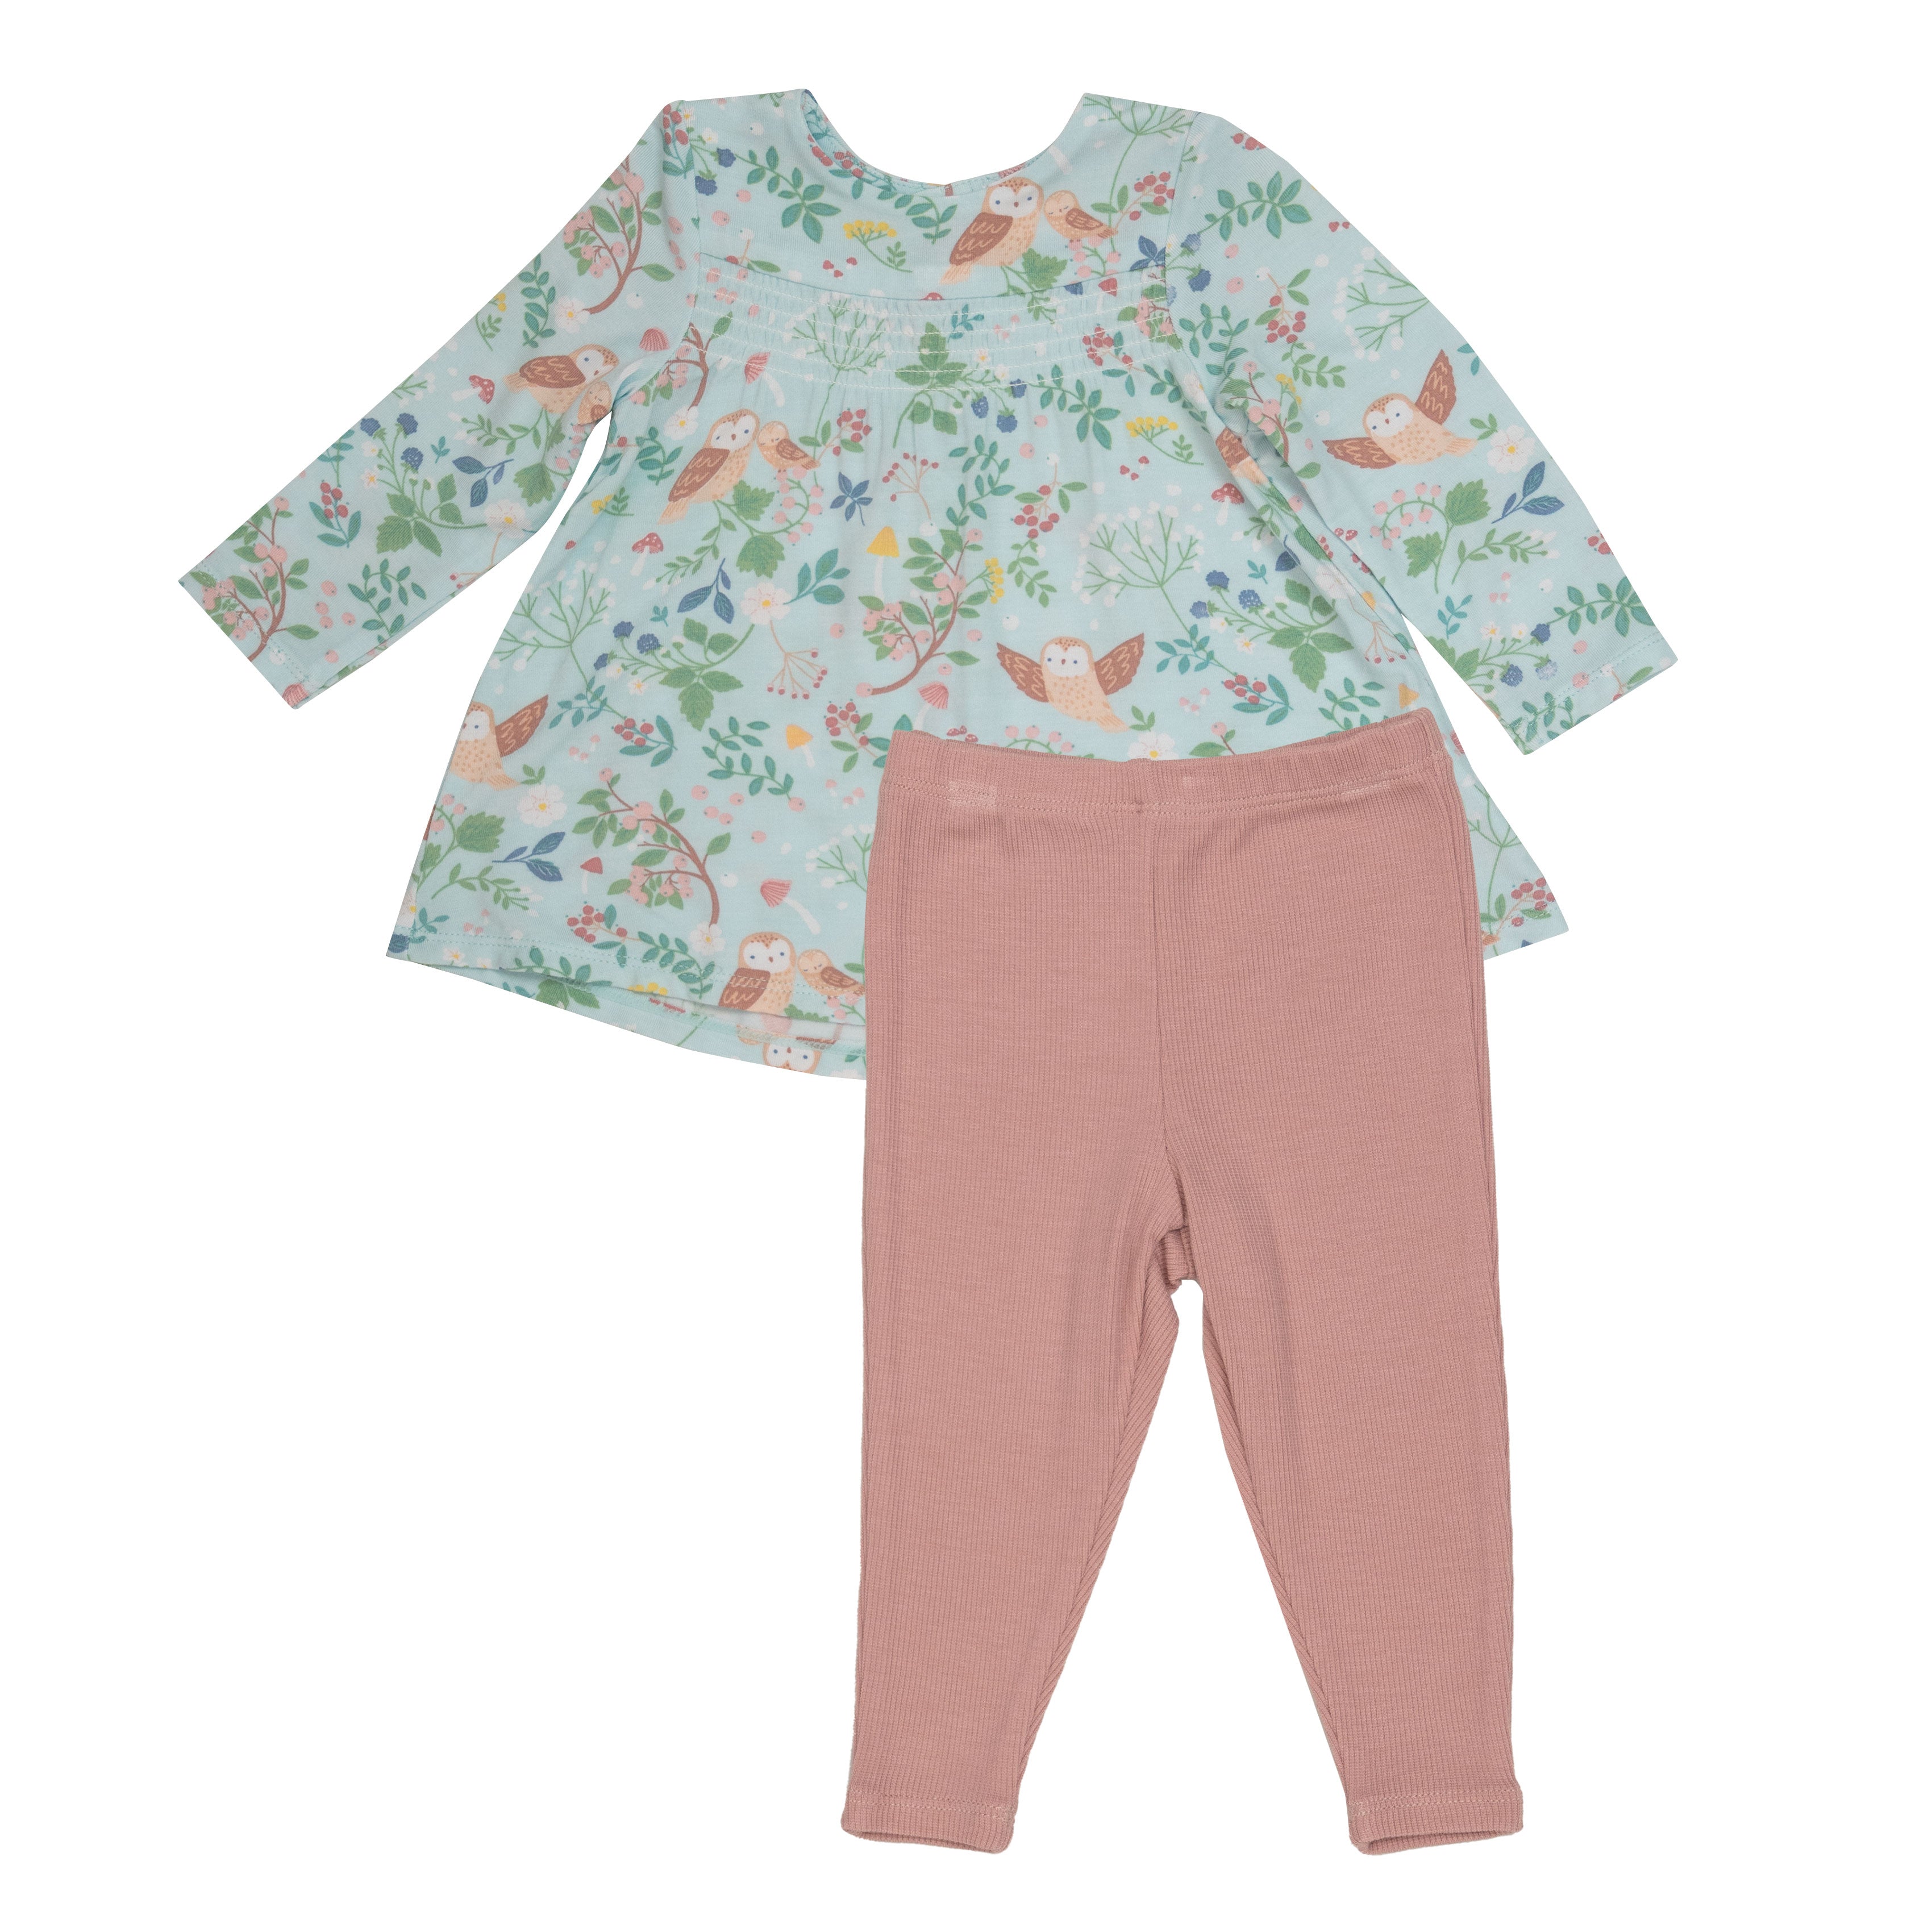 Smocked Top And Legging - Pretty Owls